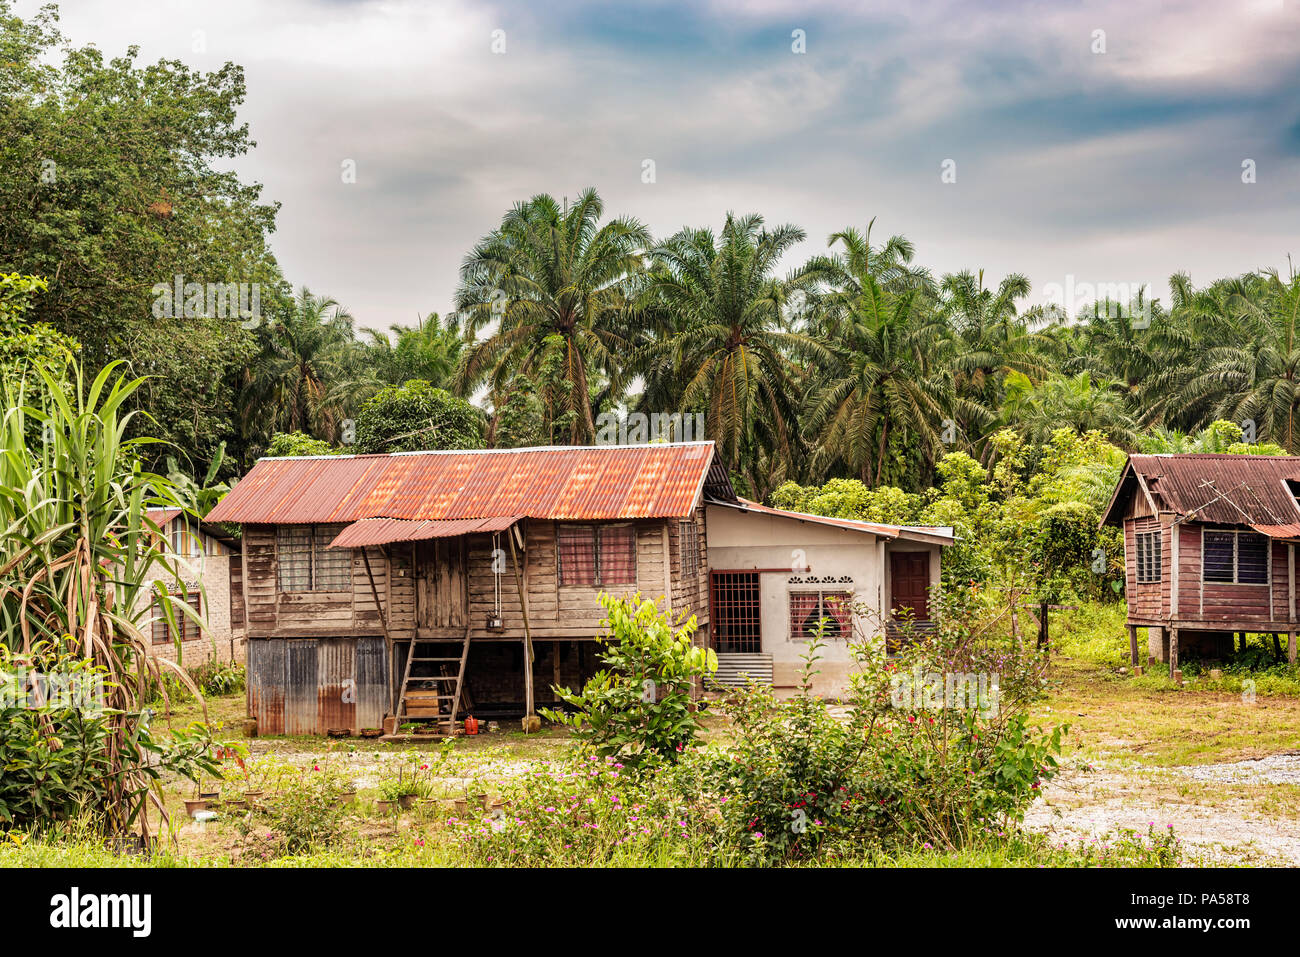 Typical family houses in small village in rural area, Malaysia. Stock Photo